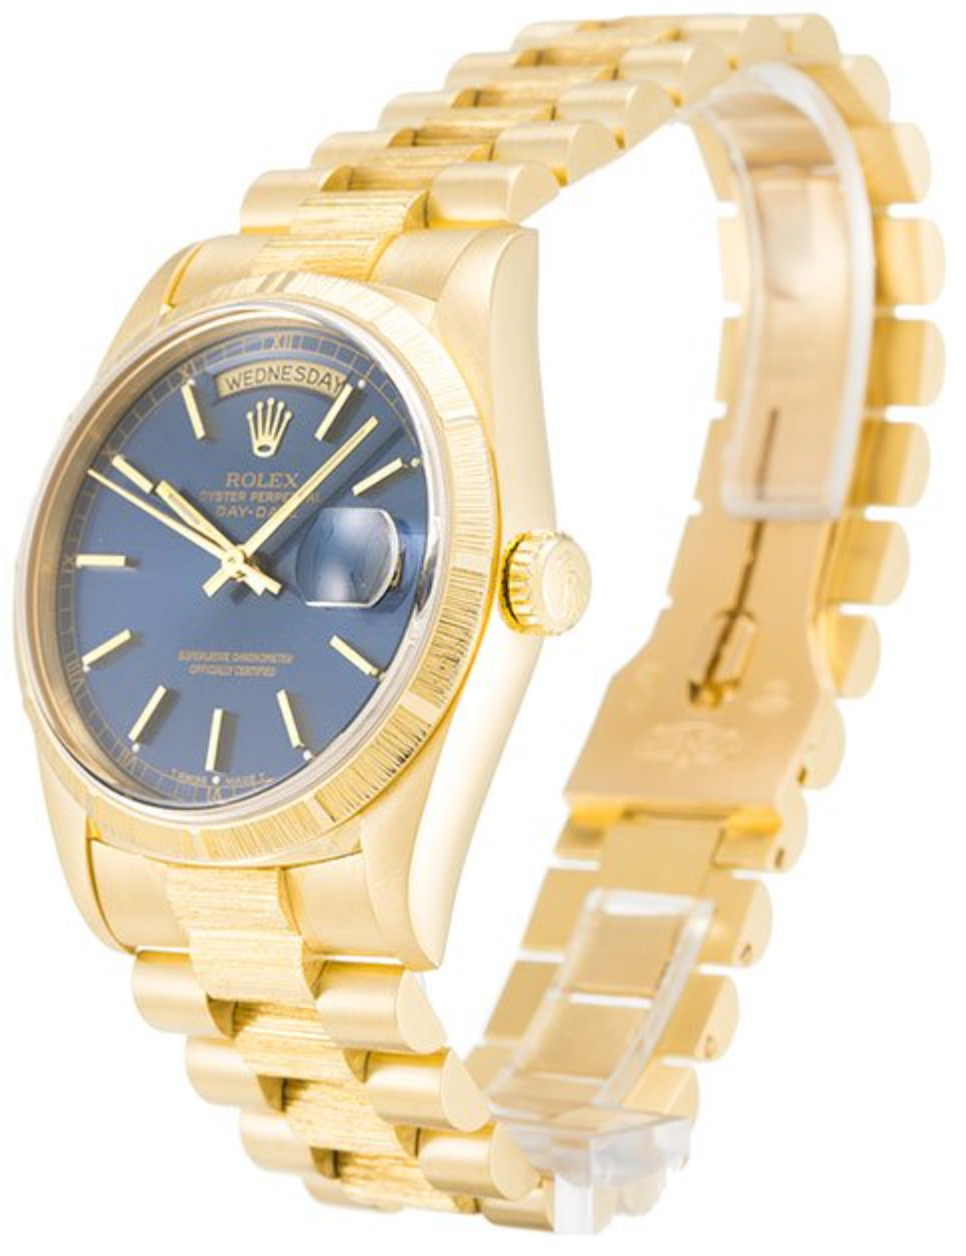 Replica Rolex Day-Date Gold with Blue Dial